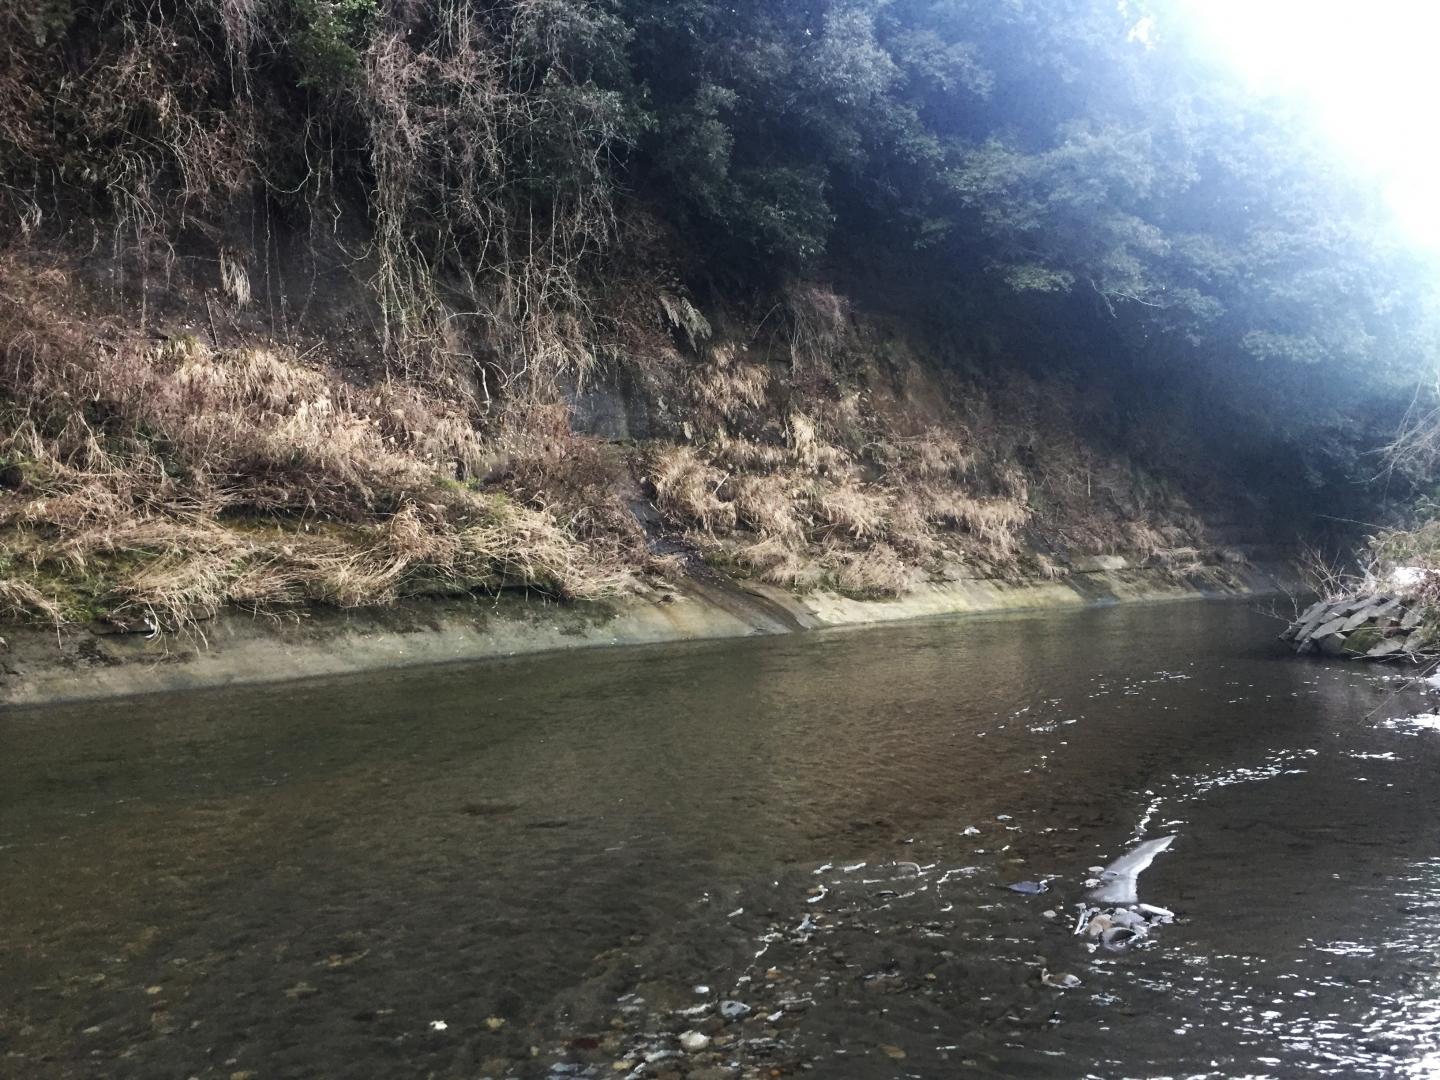 Yoro River Section, One of Chiba Composite Section